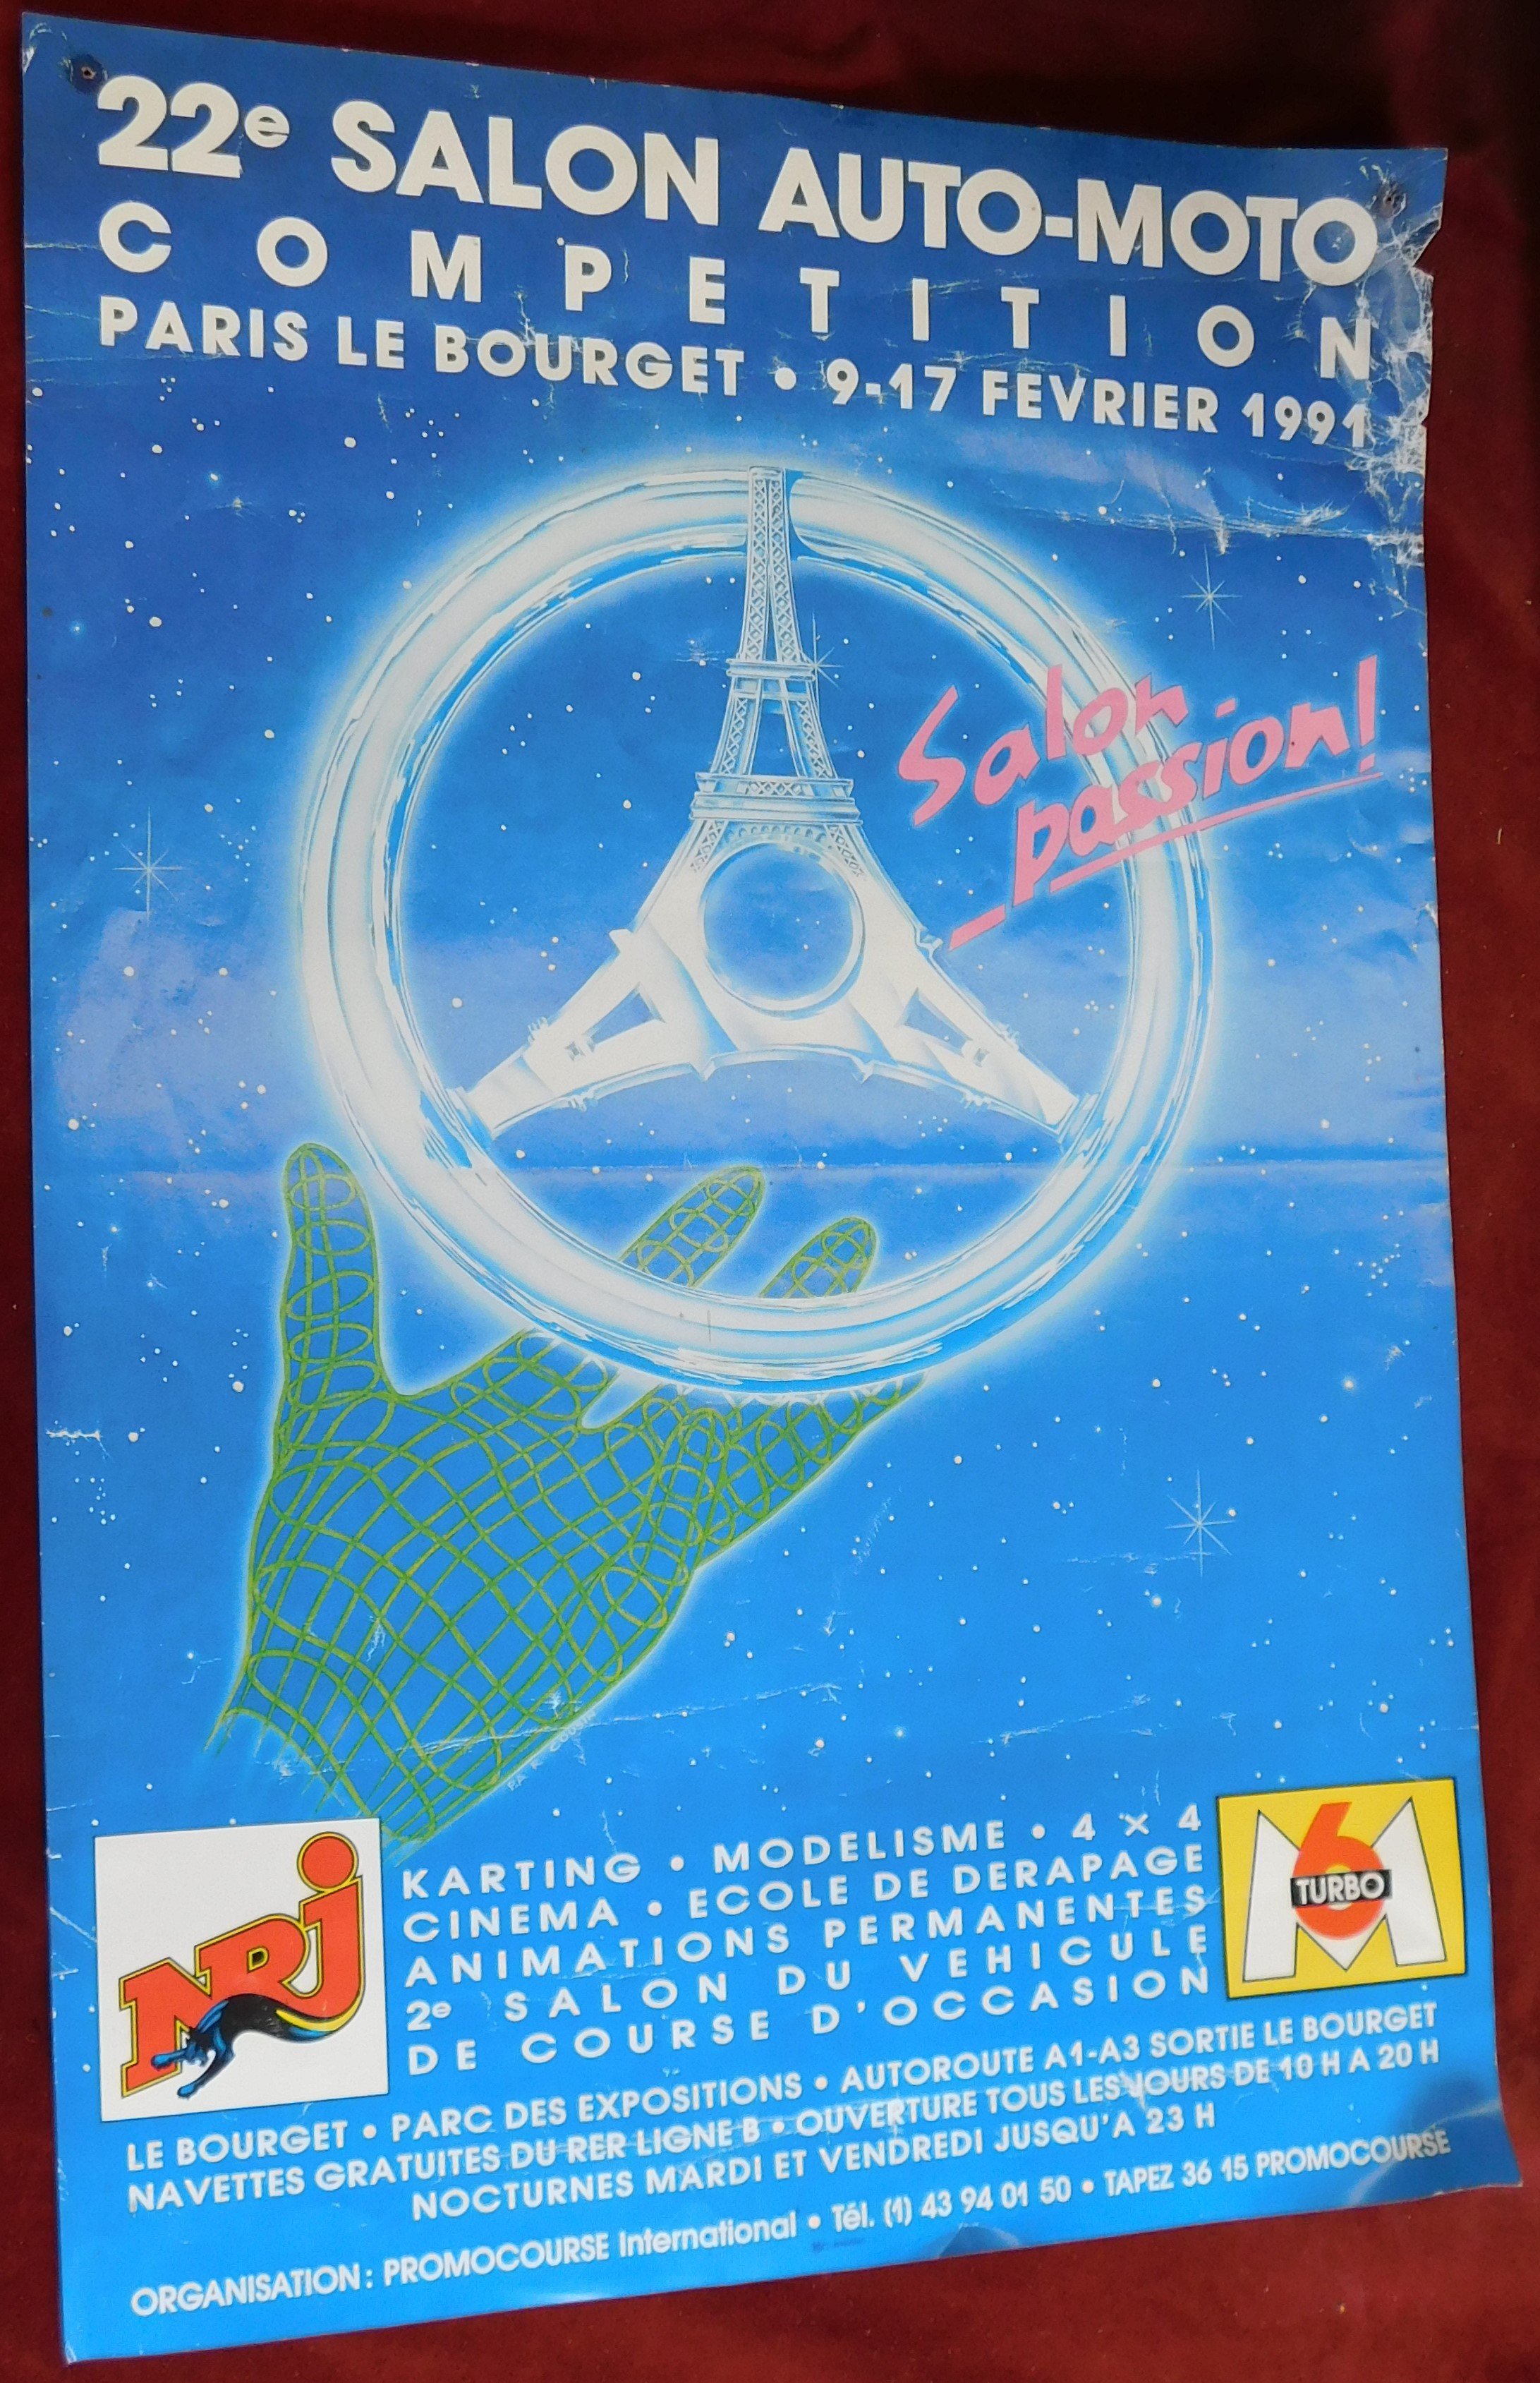 Poster-22e Salon Auto-Moto Competition-Paris le Bourget 1991-coloured poster of Steering wheel - Image 6 of 7